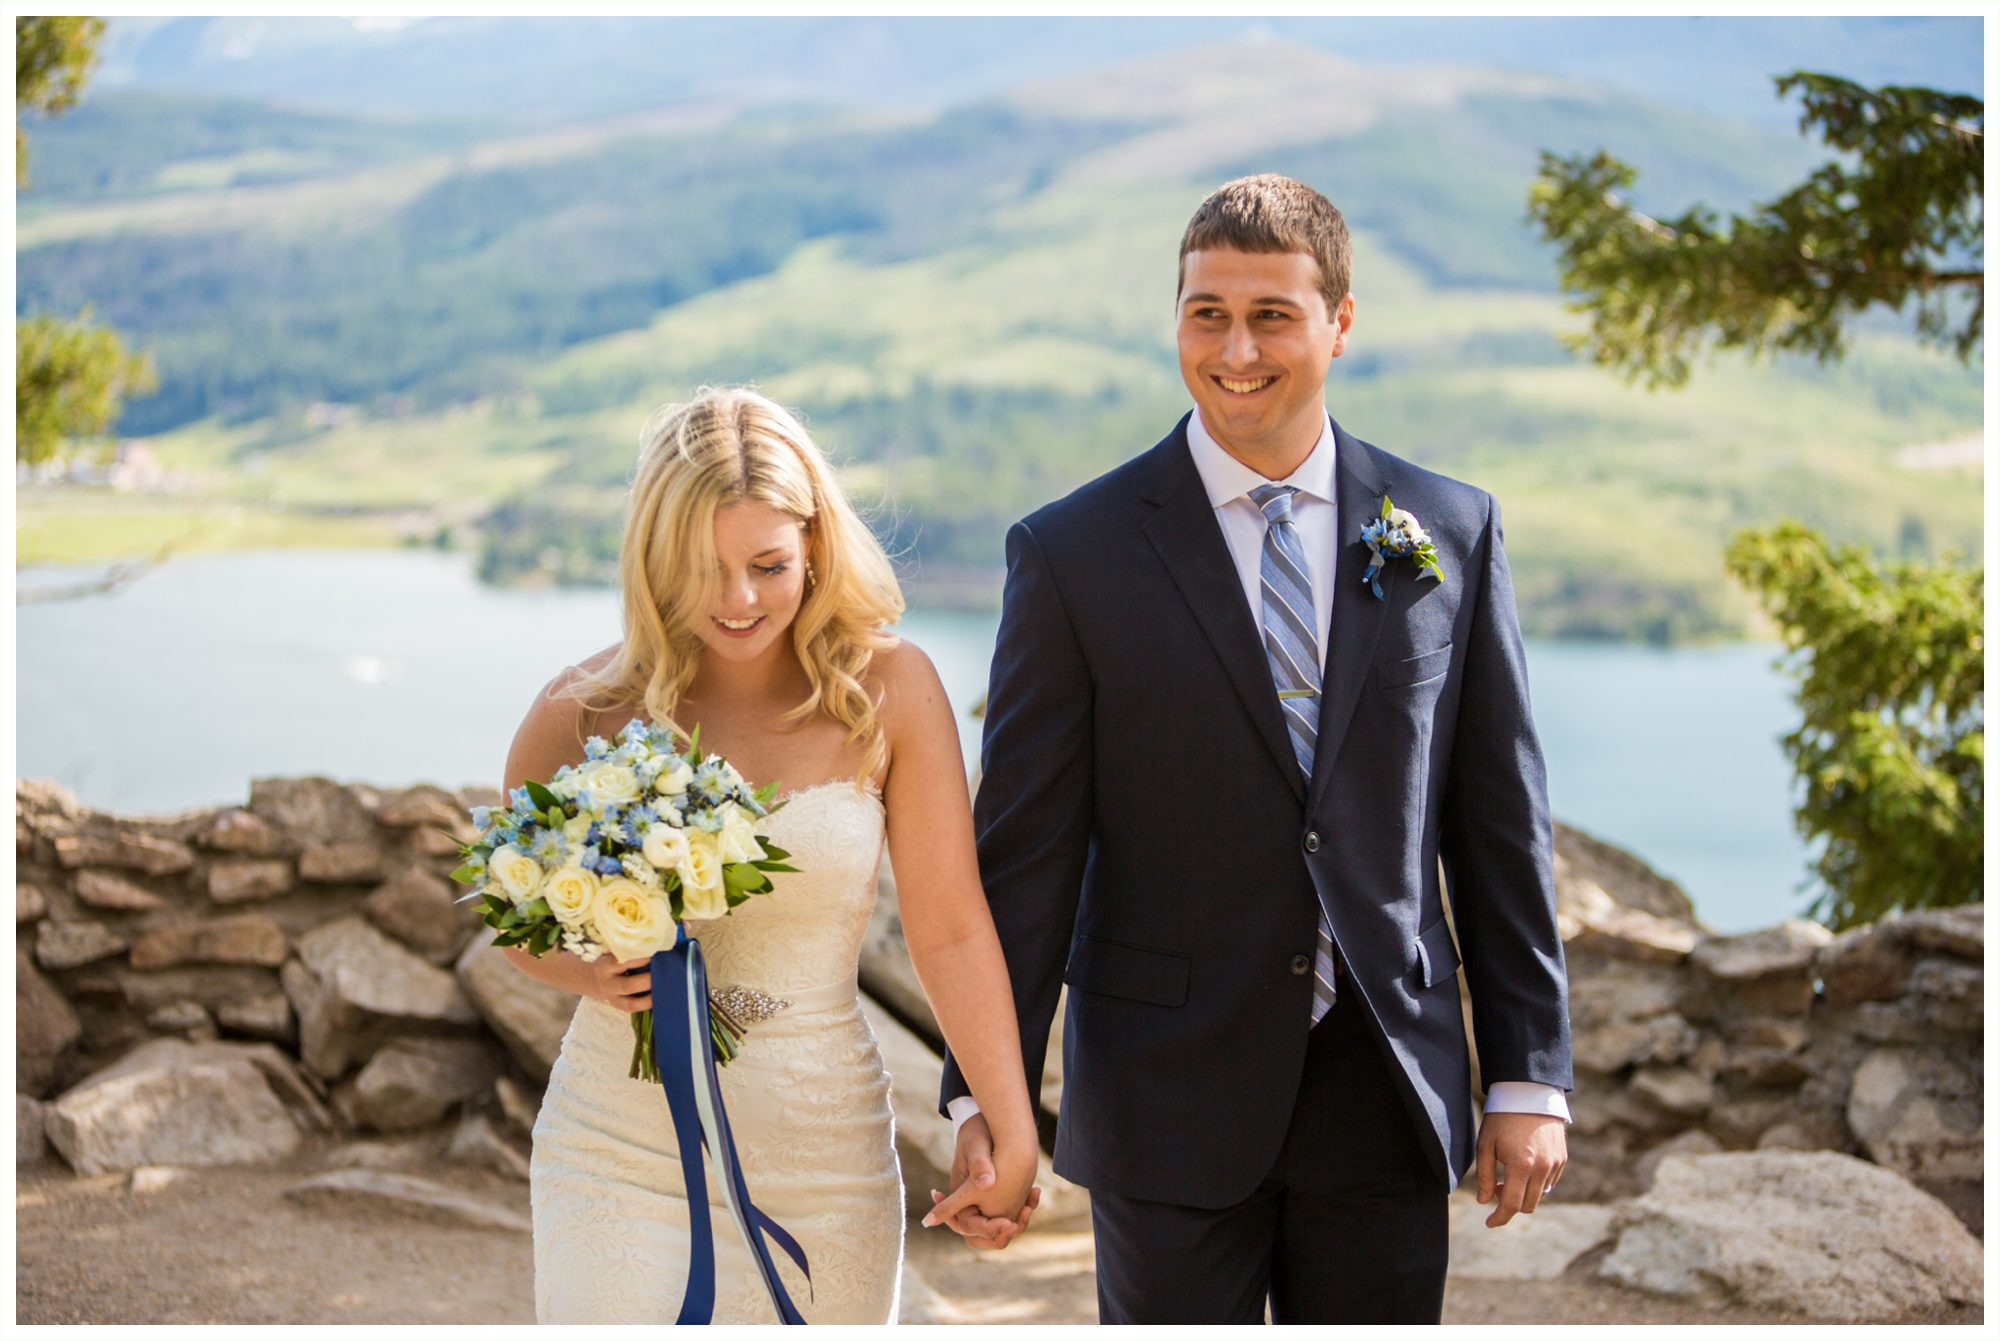 bride and groom walk down aisle after getting married at sapphire point overlook wedding ceremony at lake dillon colorado